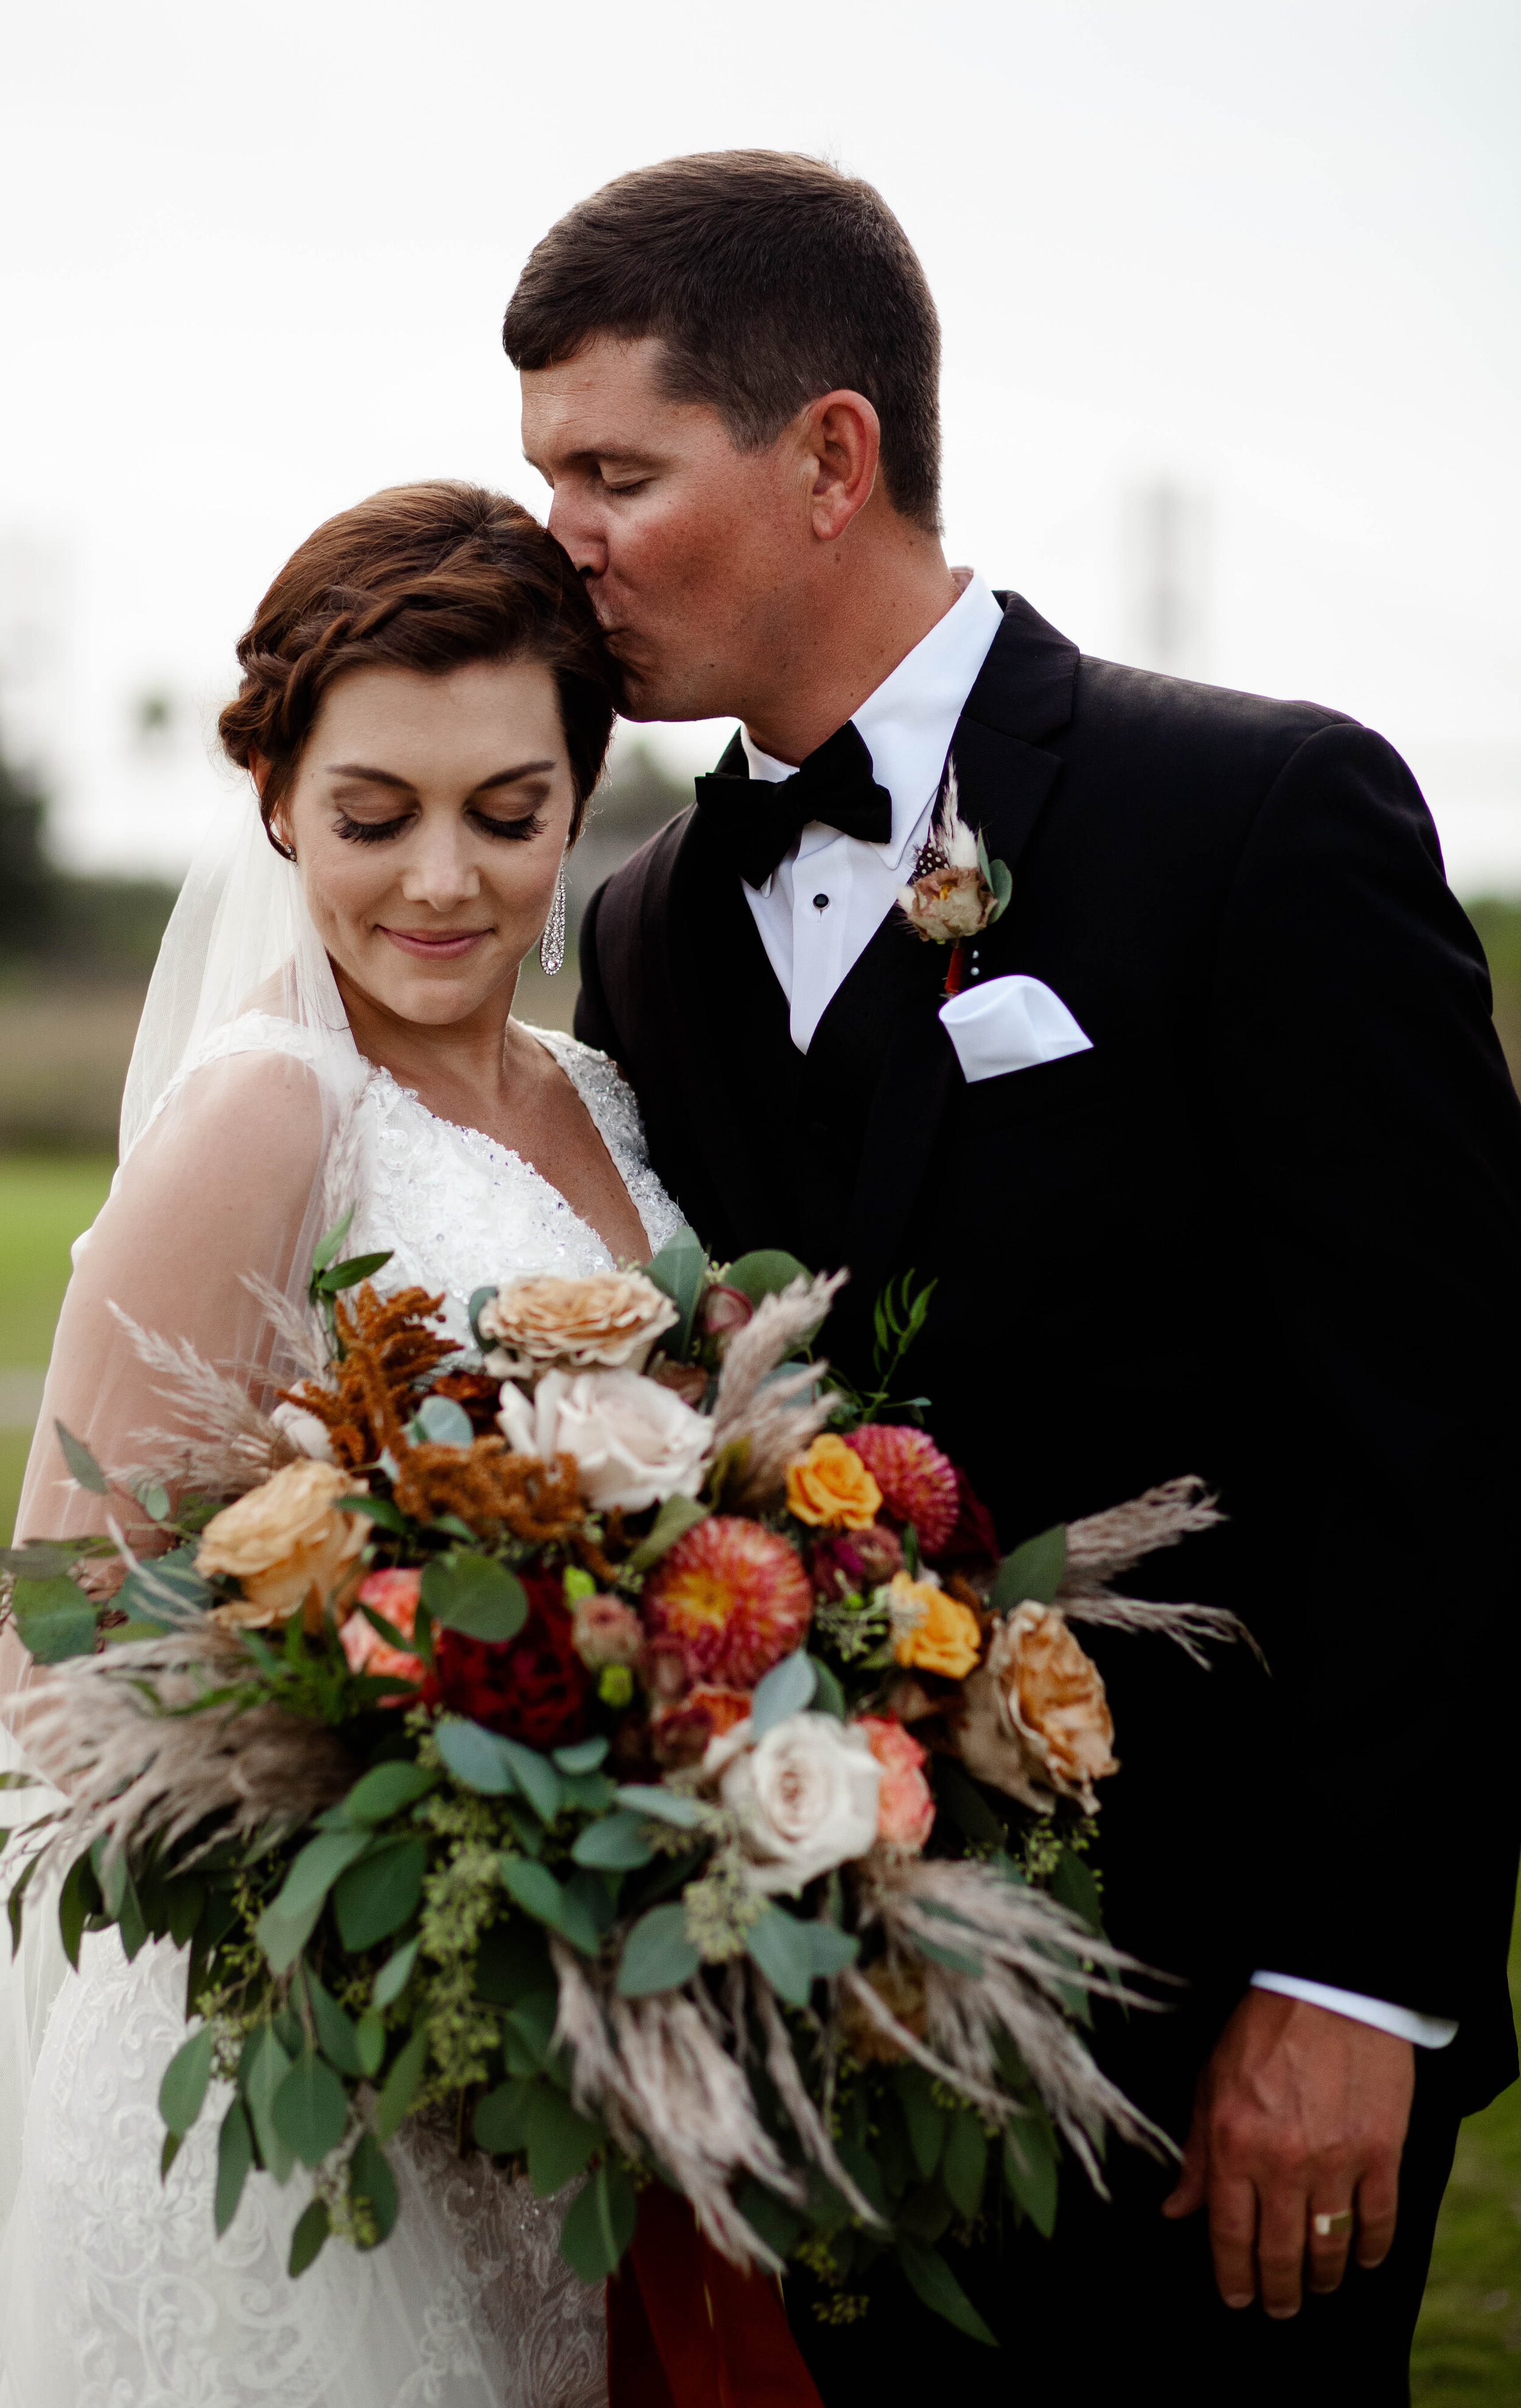 ivory-and-beau-wedding-and-florals-lydia-and-tyler-savannah-wedding-flowers-florals-savannah-florist-wedding-coordinator-georgia-florist-wedding-florist-wedding-inspo-inspiration-wedding-blog_MG_5245.jpg